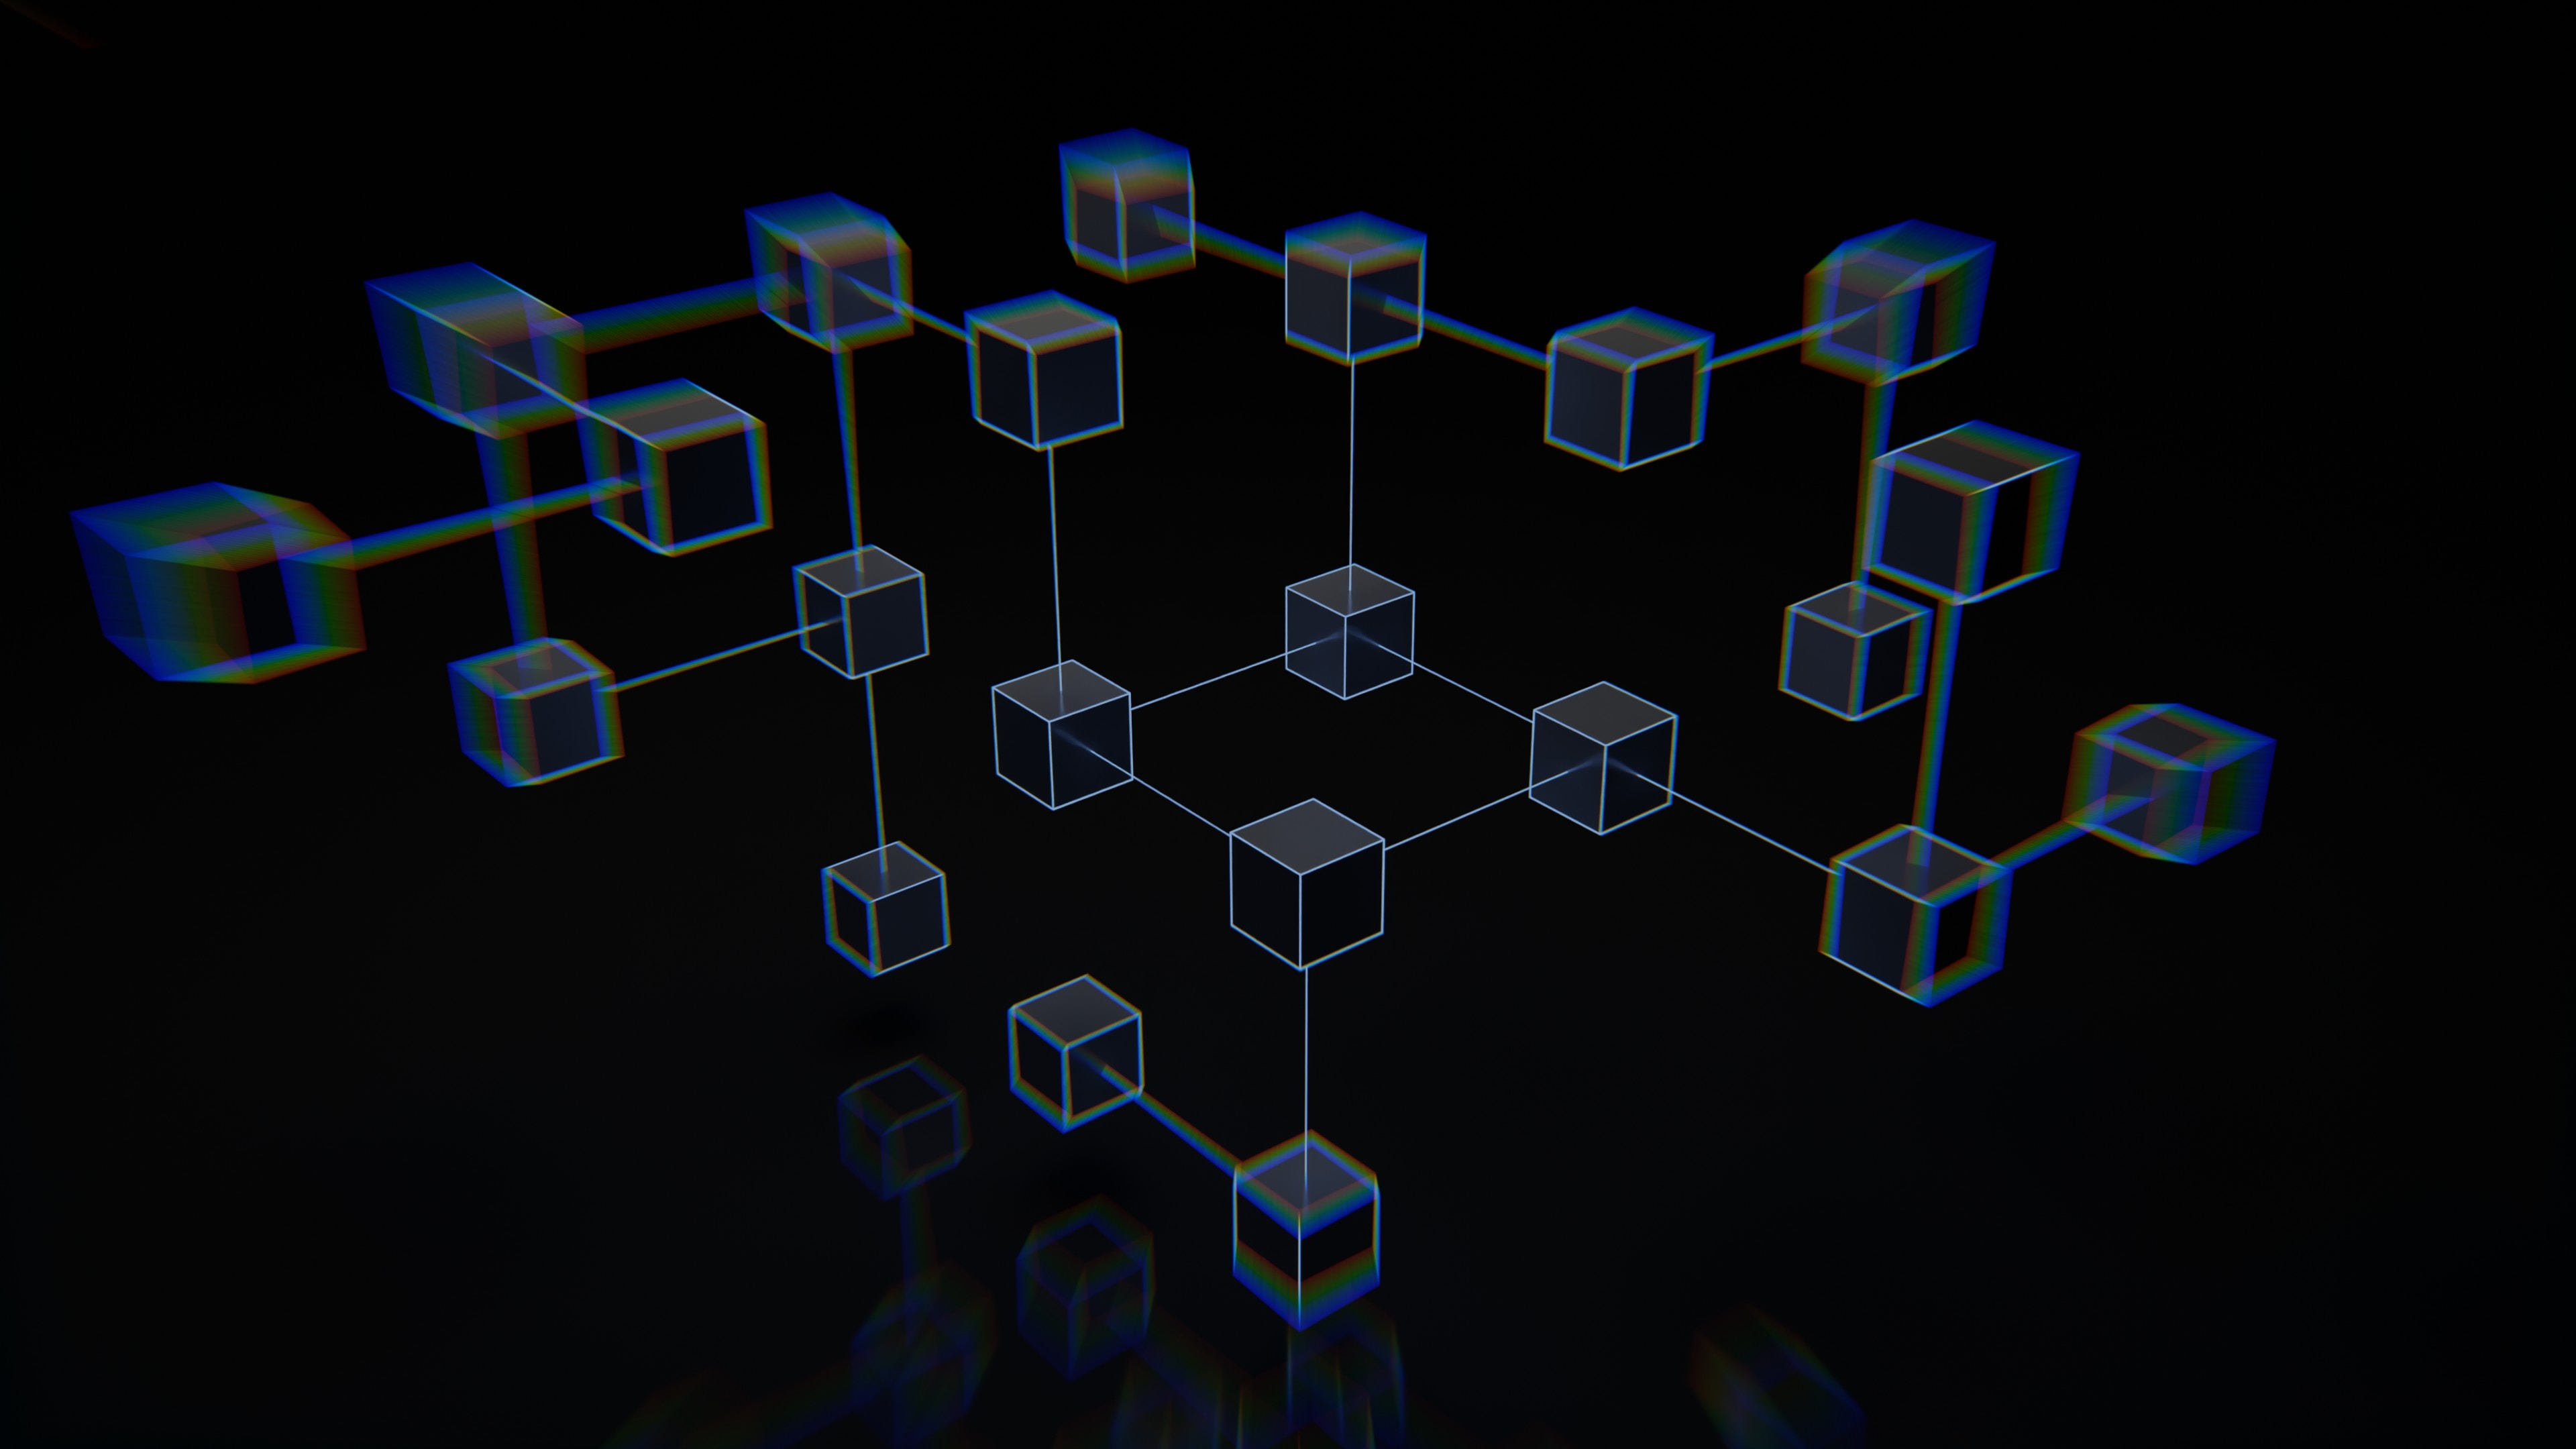 Image shows interconnected blocks as a conceptual diagram of the blockchain